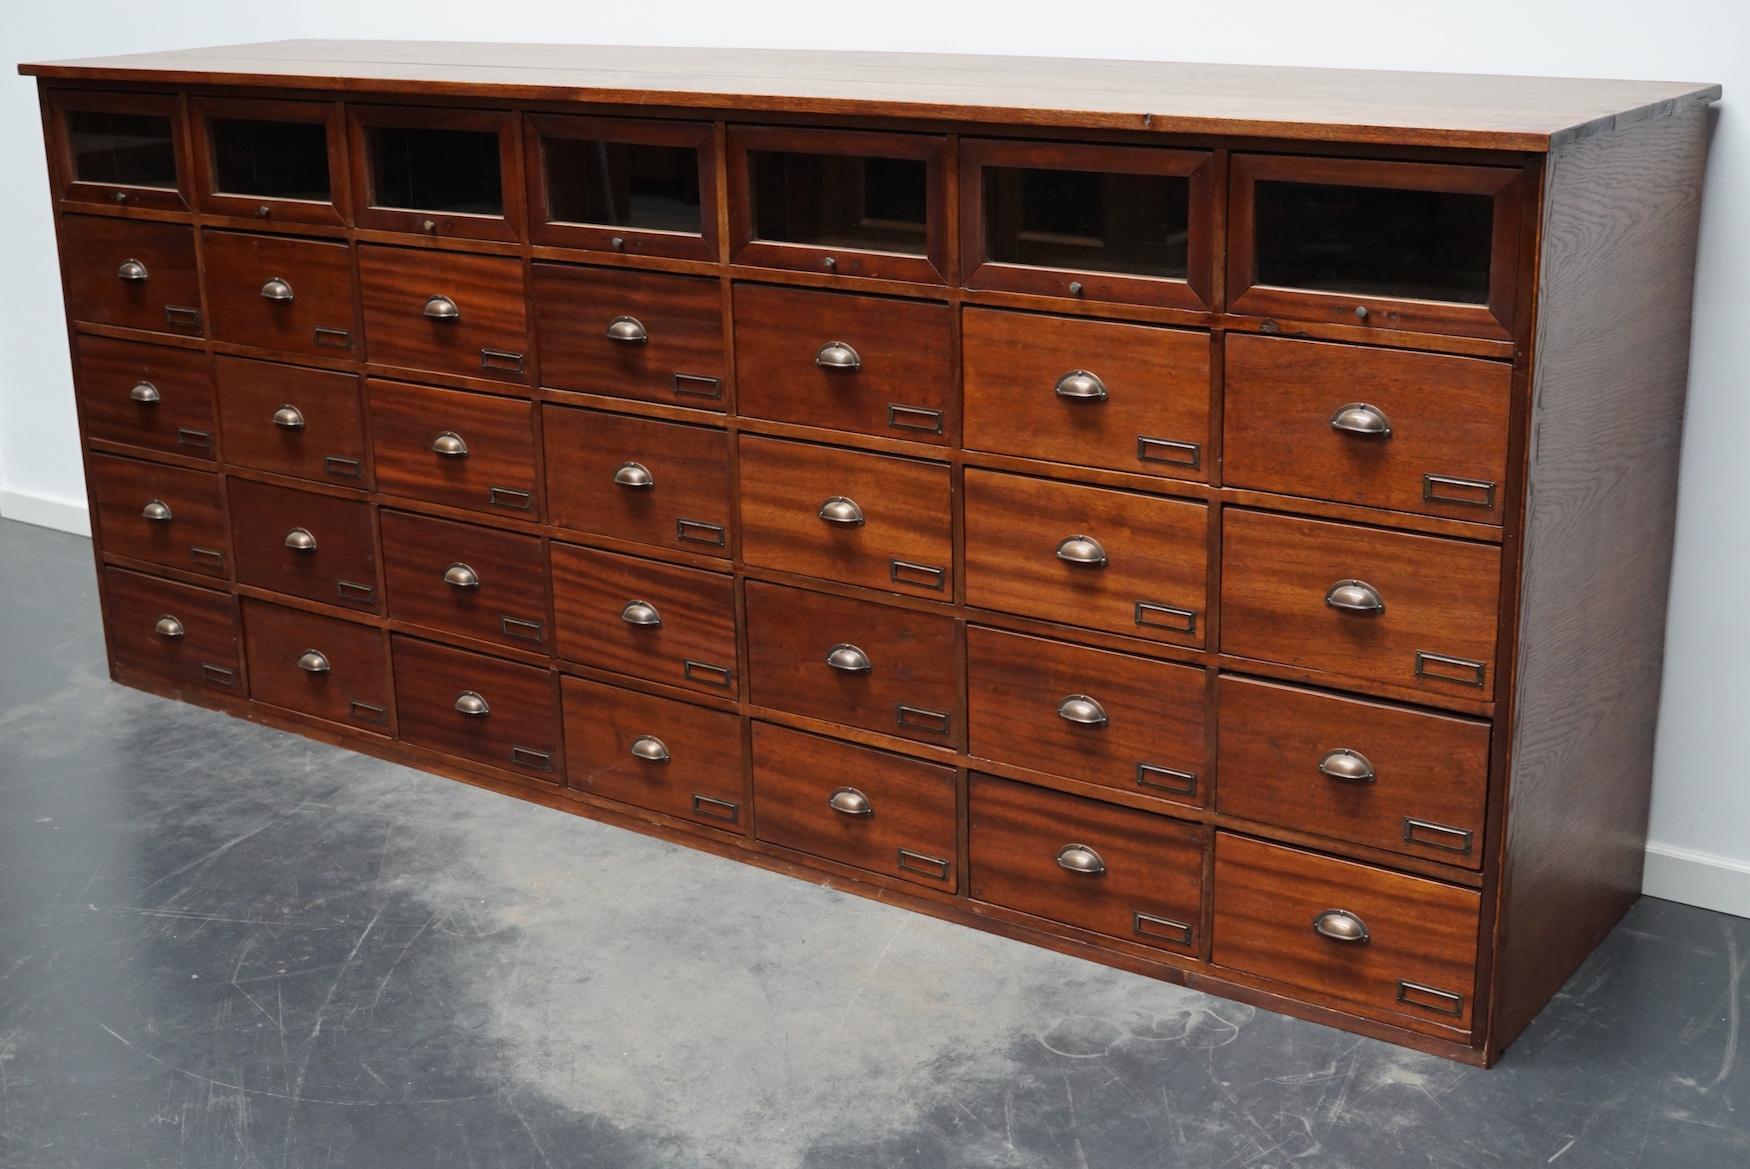 This haberdashery cabinet was produced during the 1940s in the Netherlands. It features 35 drawers in mahogany, some with glass fronts and with brass handles / name card holders. It was originally used in a shop for sewing supplies and fabrics in